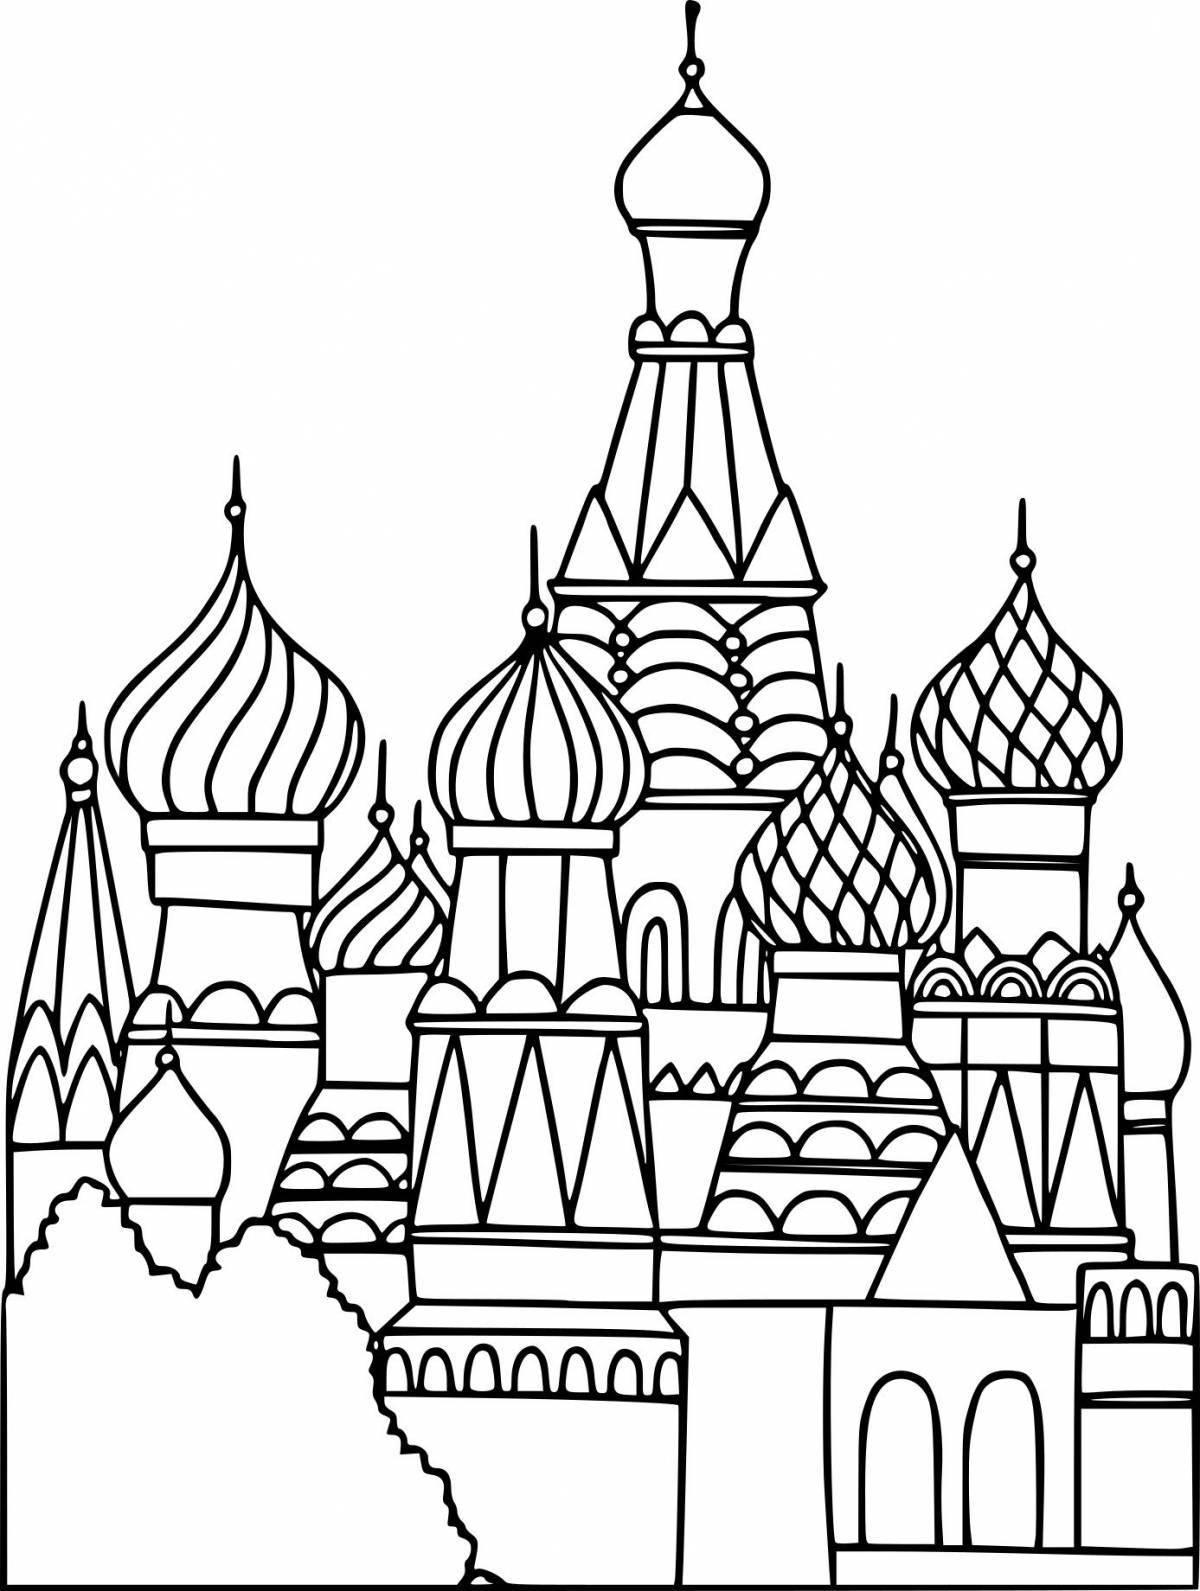 St. Basil's Cathedral coloring page